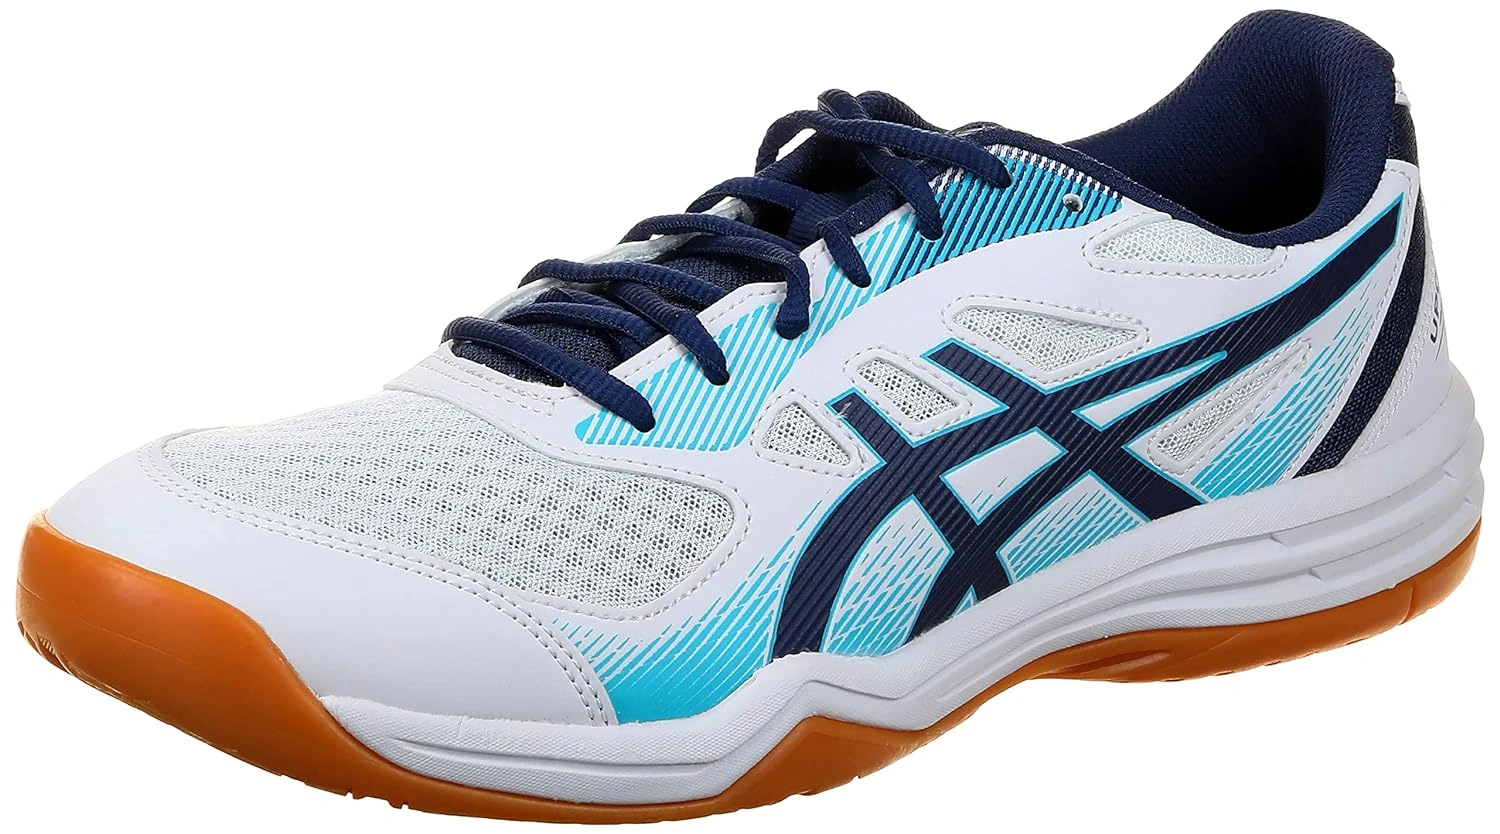 ASICS Upcourt 5 Men's Badminton Shoes: Lightweight, Flexible Badminton Trainers for Optimal Performance on the Court-52371